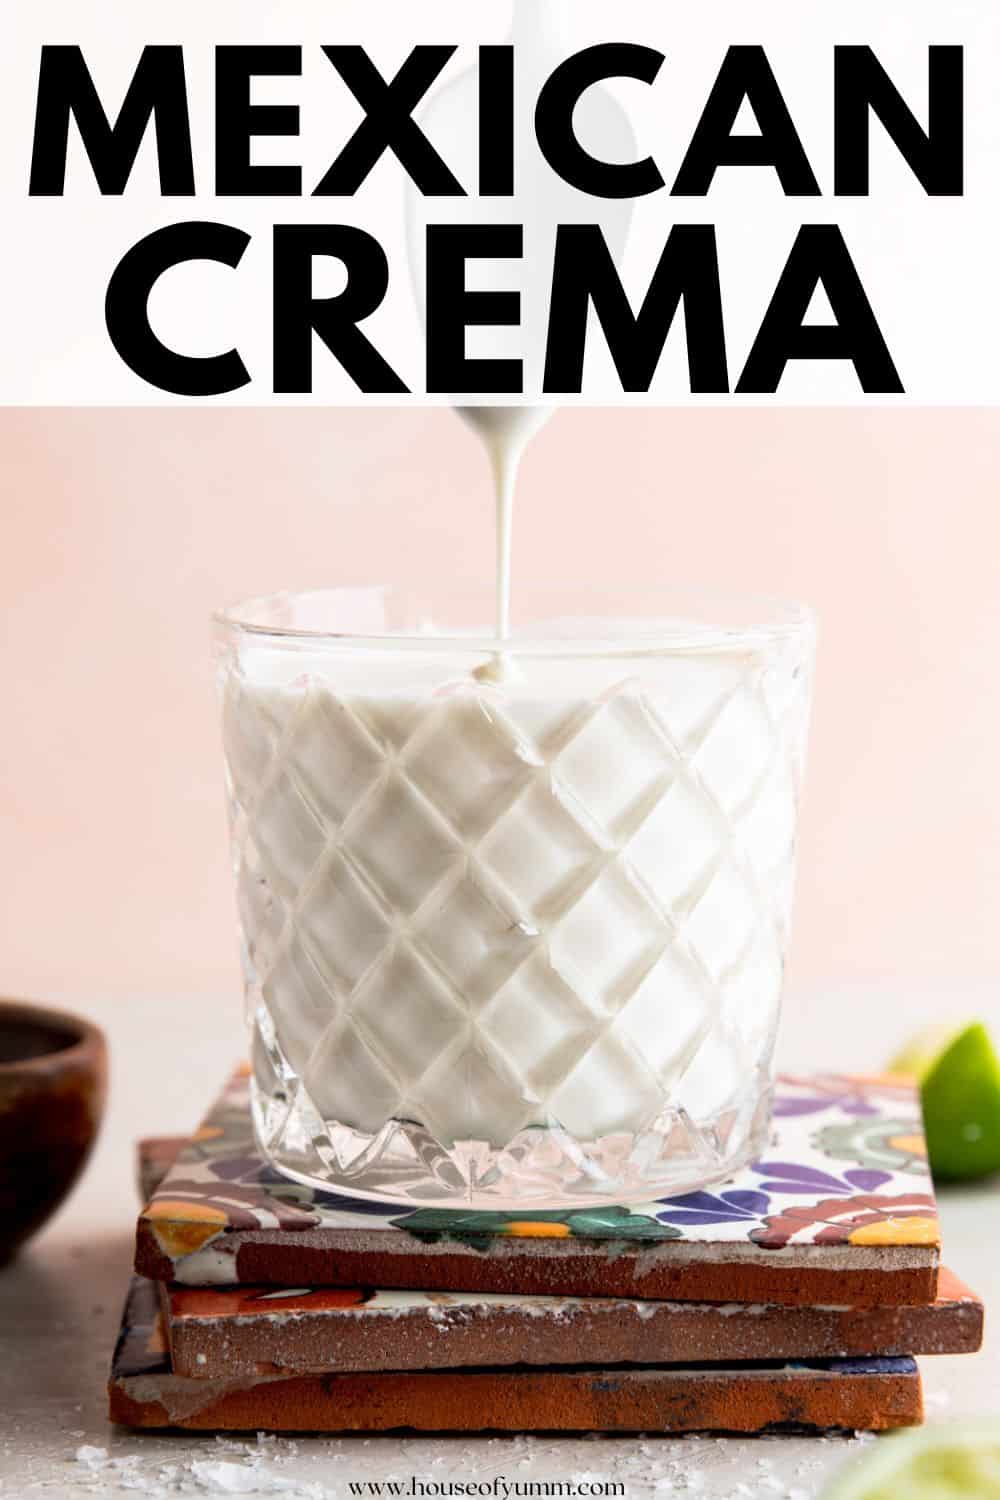 Mexican Crema with text.